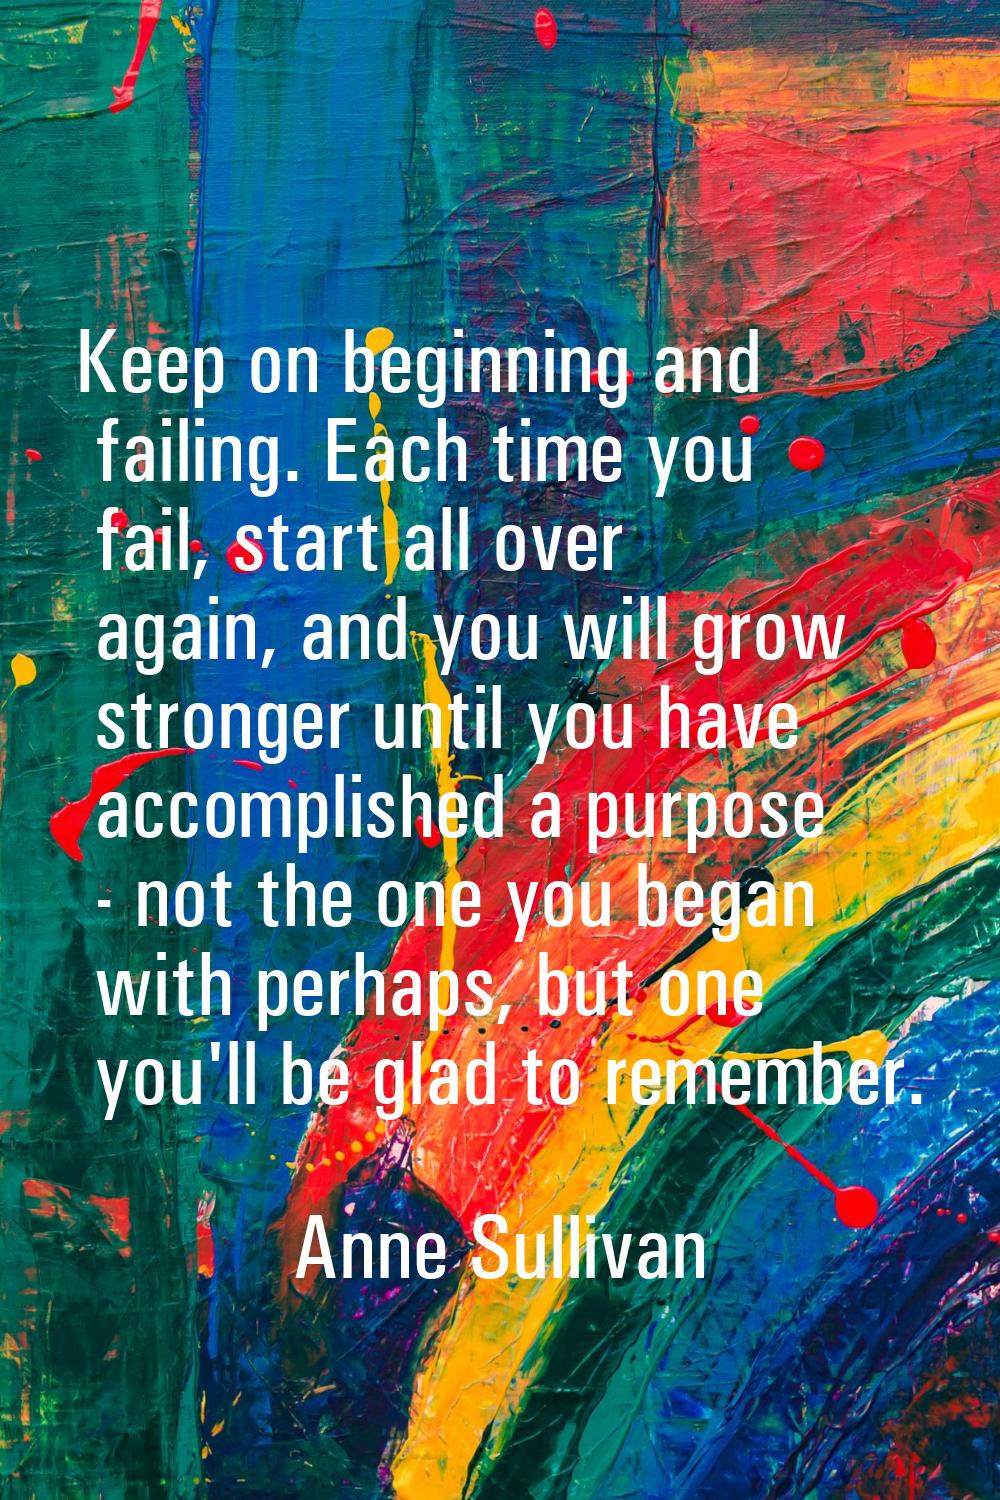 Keep on beginning and failing. Each time you fail, start all over again, and you will grow stronger